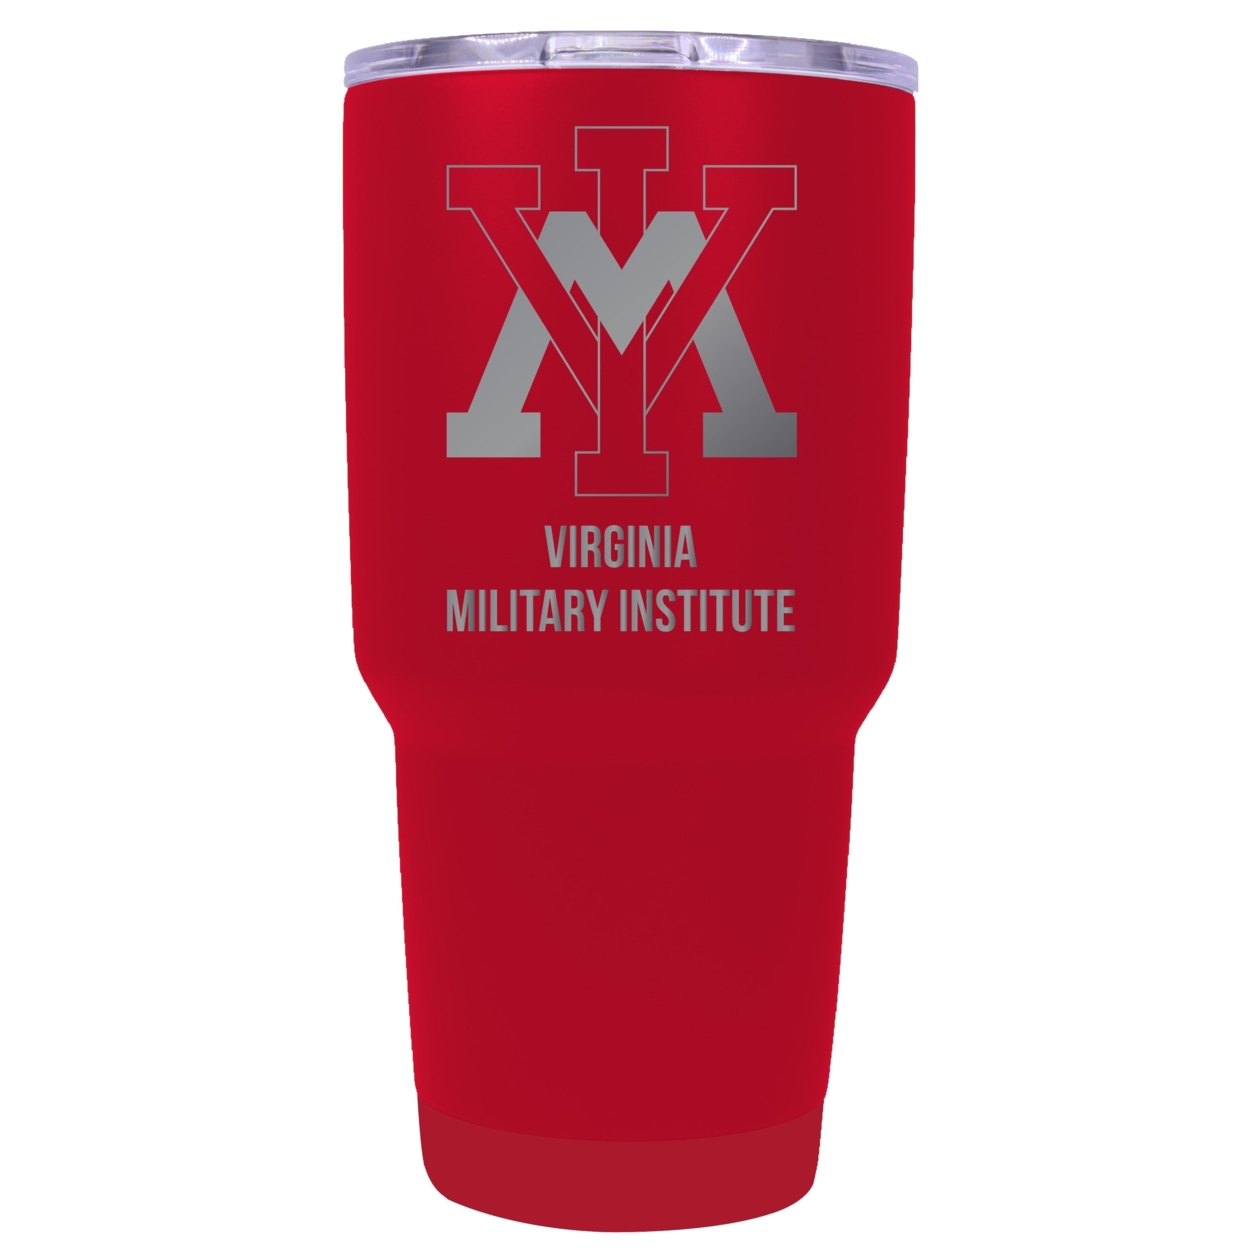 VMI Keydets 24 Oz Laser Engraved Stainless Steel Insulated Tumbler - Choose Your Color. - Red